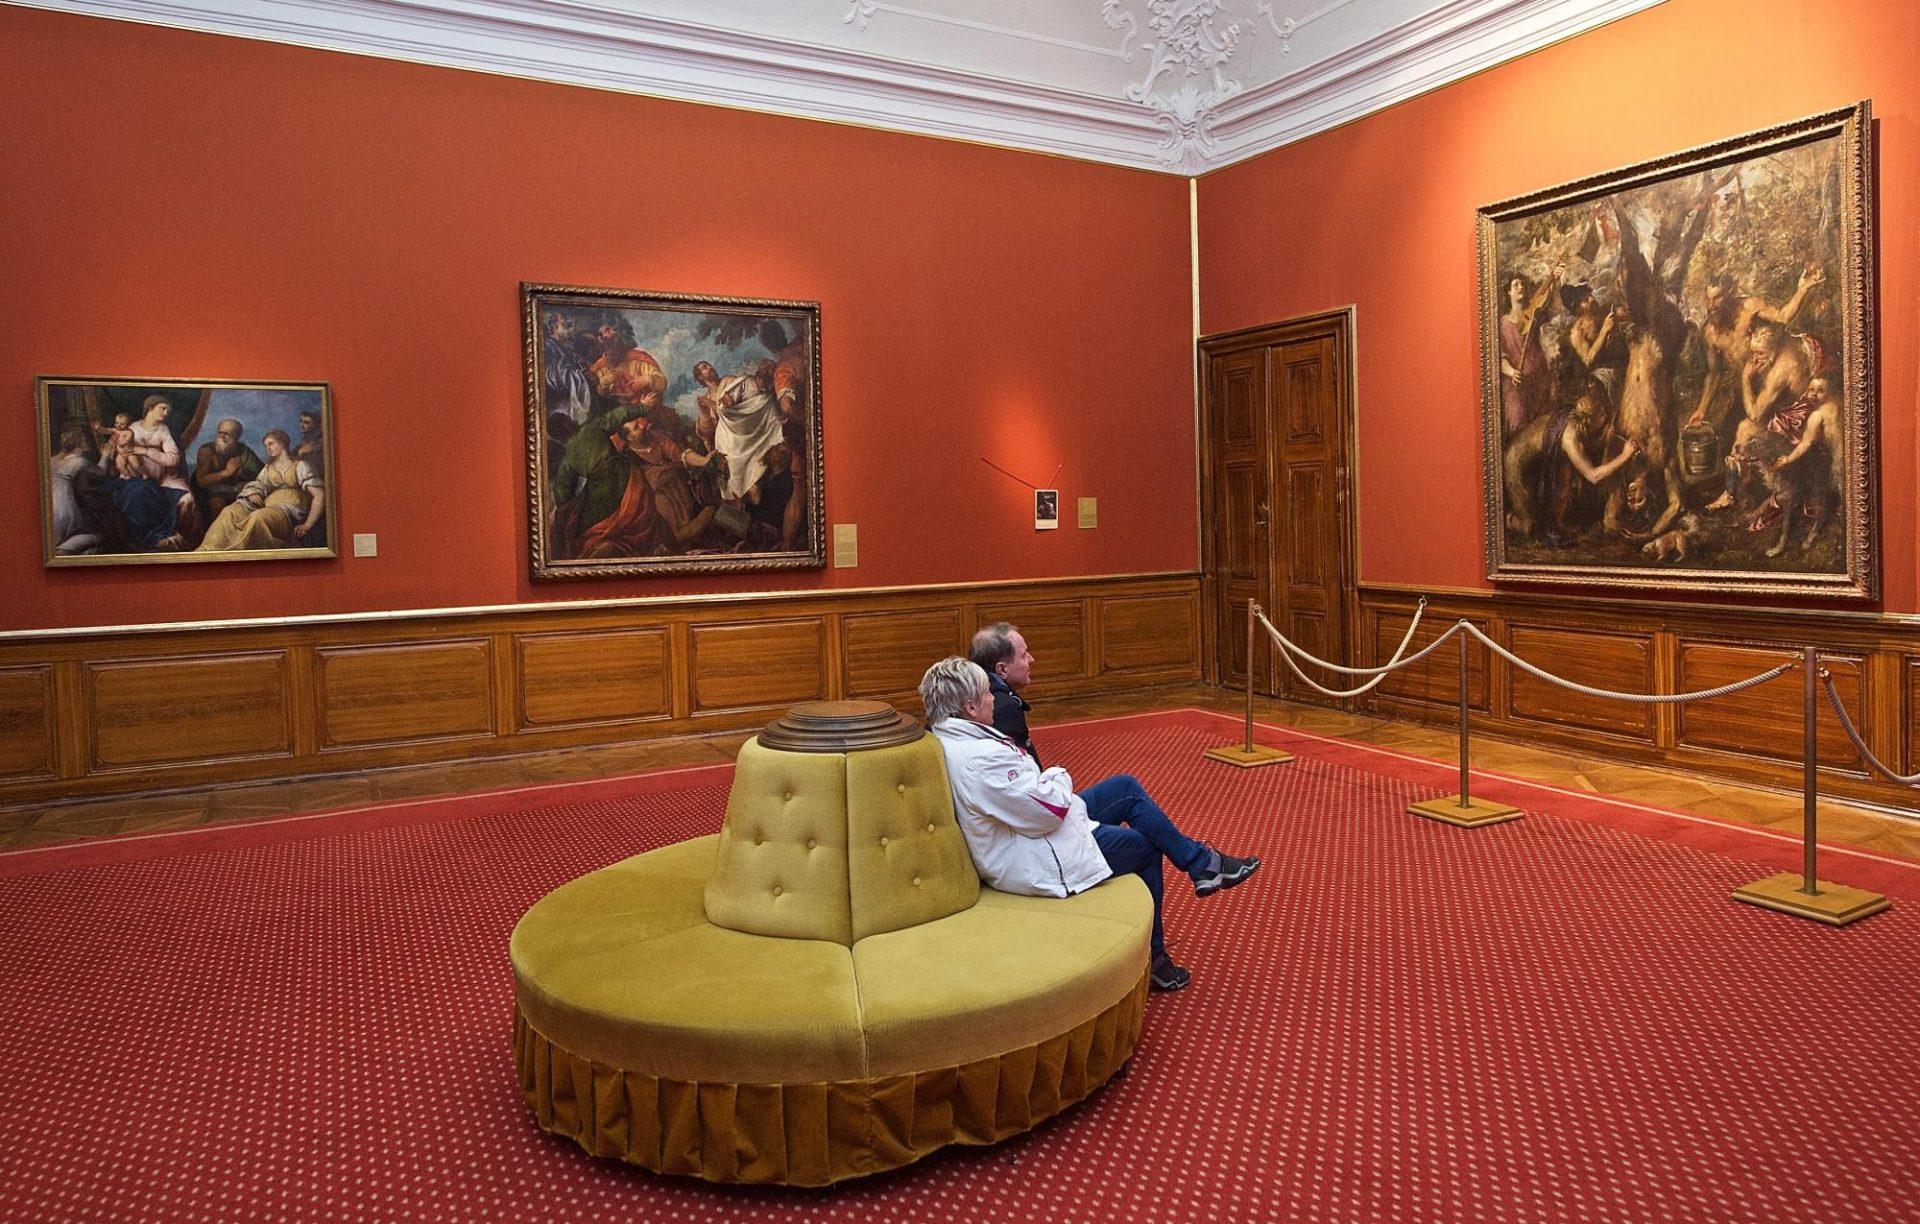 You can just sit there and relax in front of one the most precious paintings in the Czech Republic. – © Markéta Ondrušková